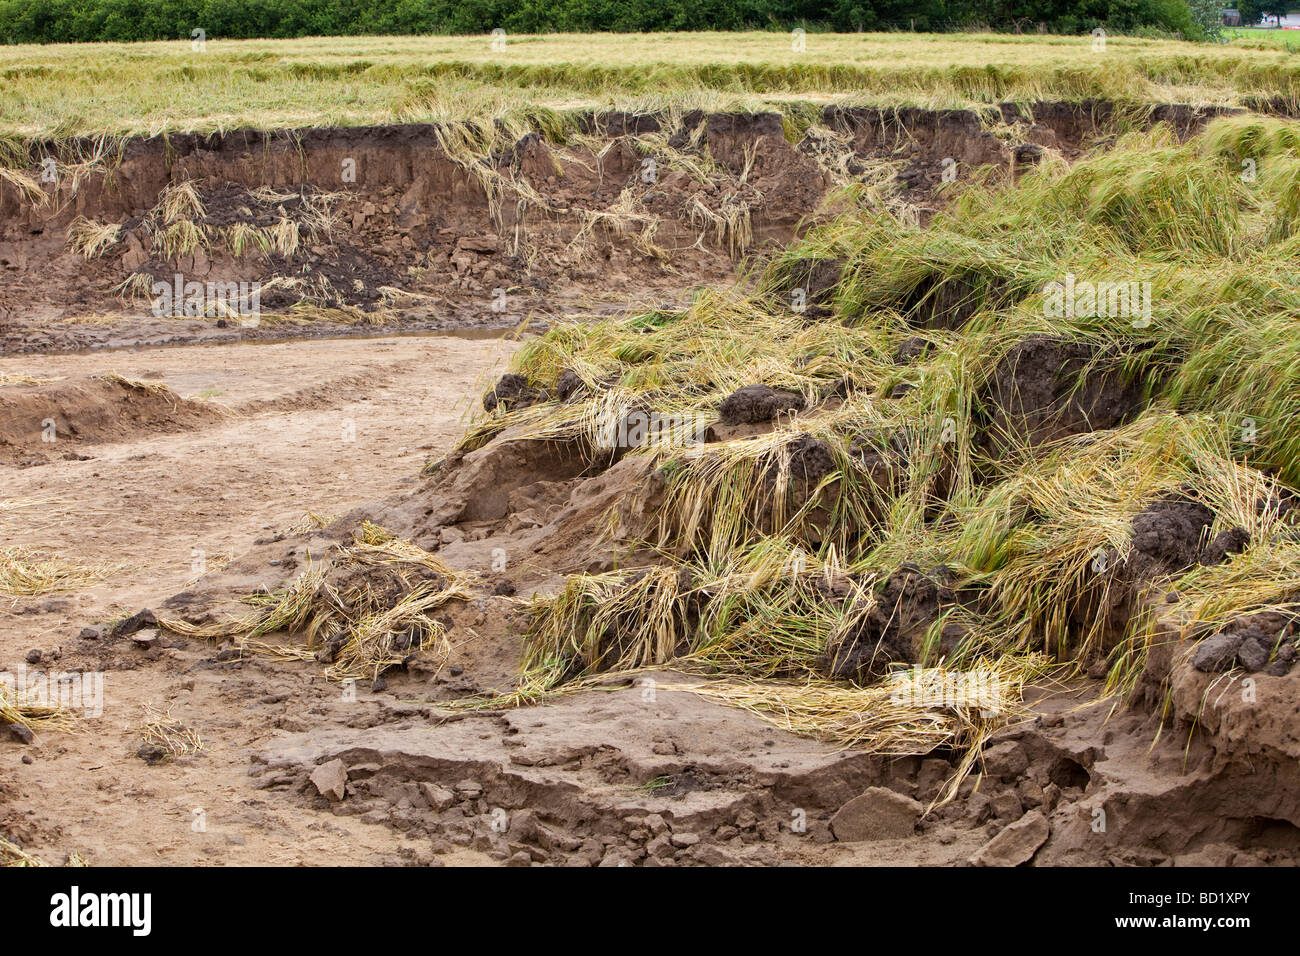 The Durham canyon caused by flooding which eroded away thousands of tons of soil from a field near Durham, UK. Stock Photo